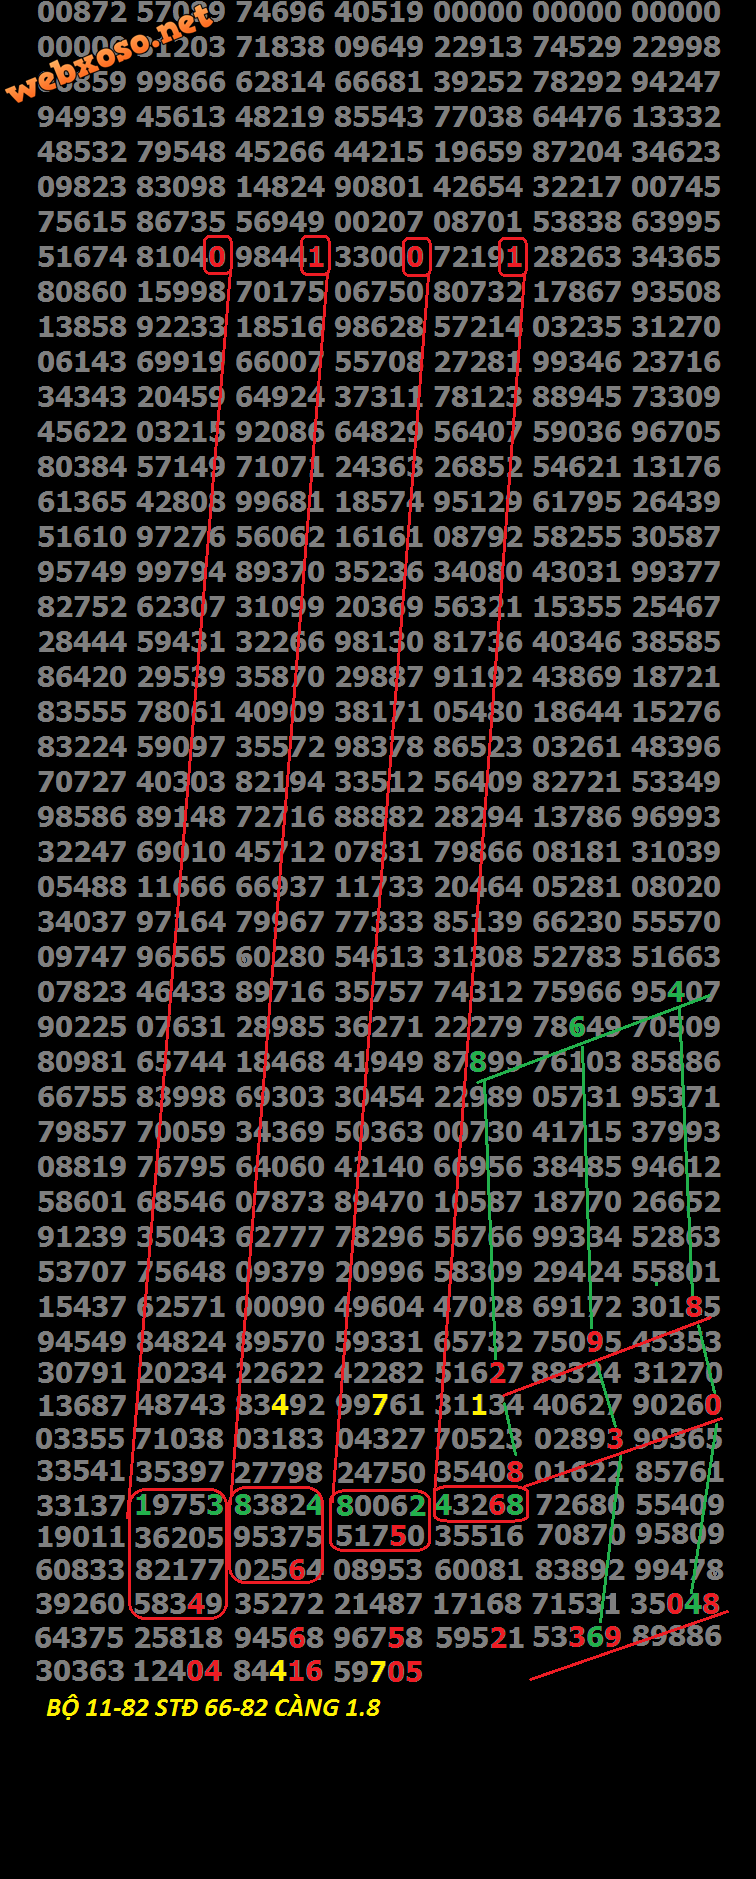 29.12.66666666666666666666666666666666.png